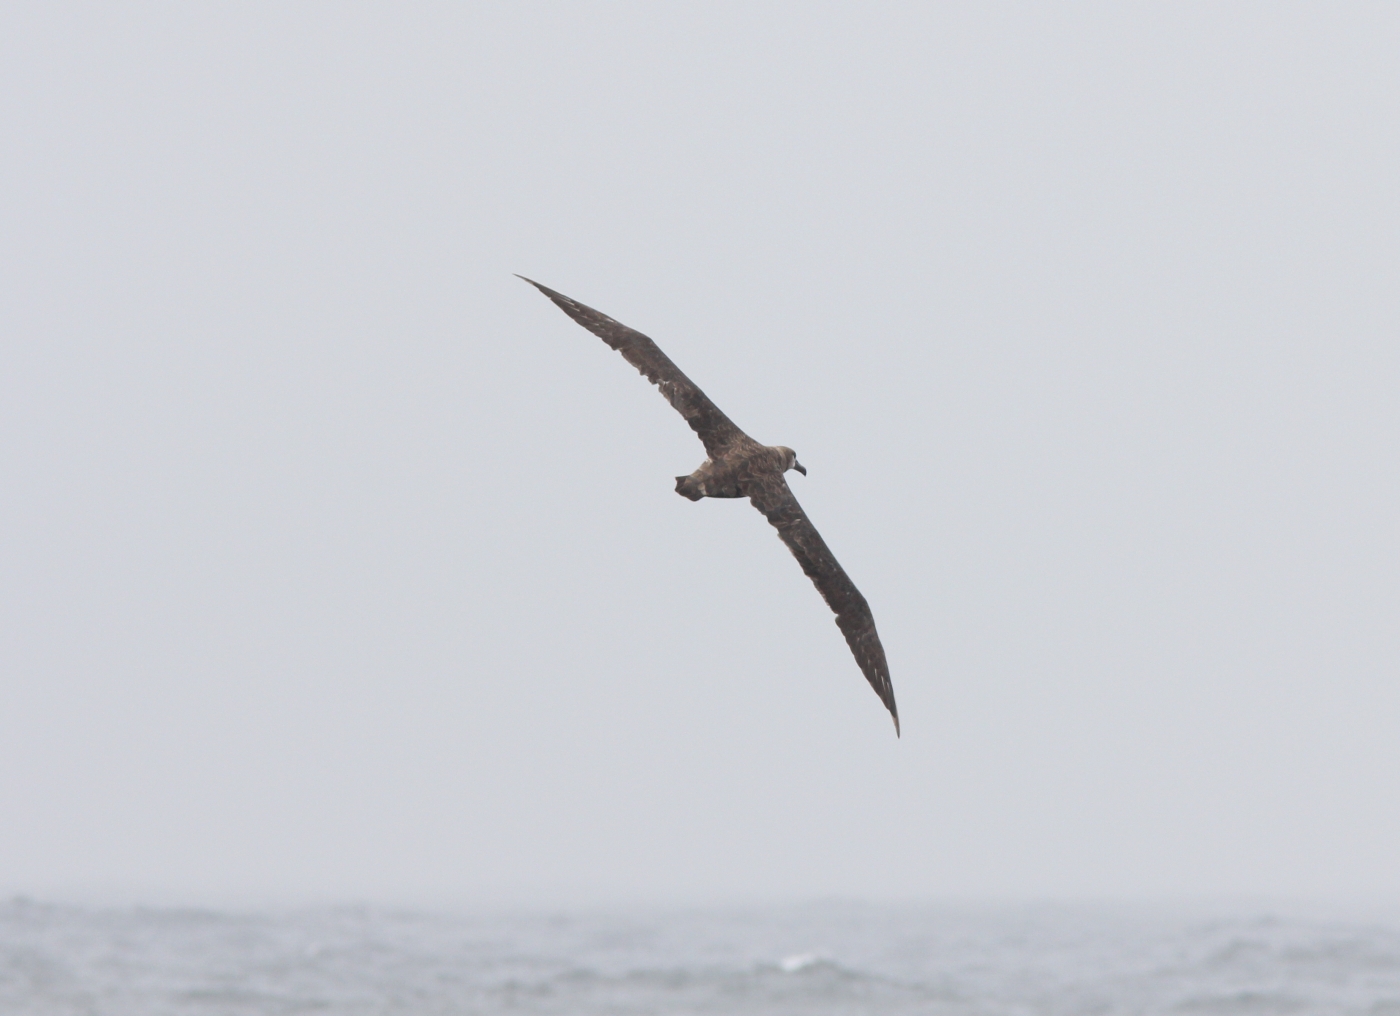 By Caleb Putnam - Black-footed Albatross, 20 miles offshore of Newport, OR, 16 July 2013, CC BY-SA 2.0, https://commons.wikimedia.org/w/index.php?curid=74693160